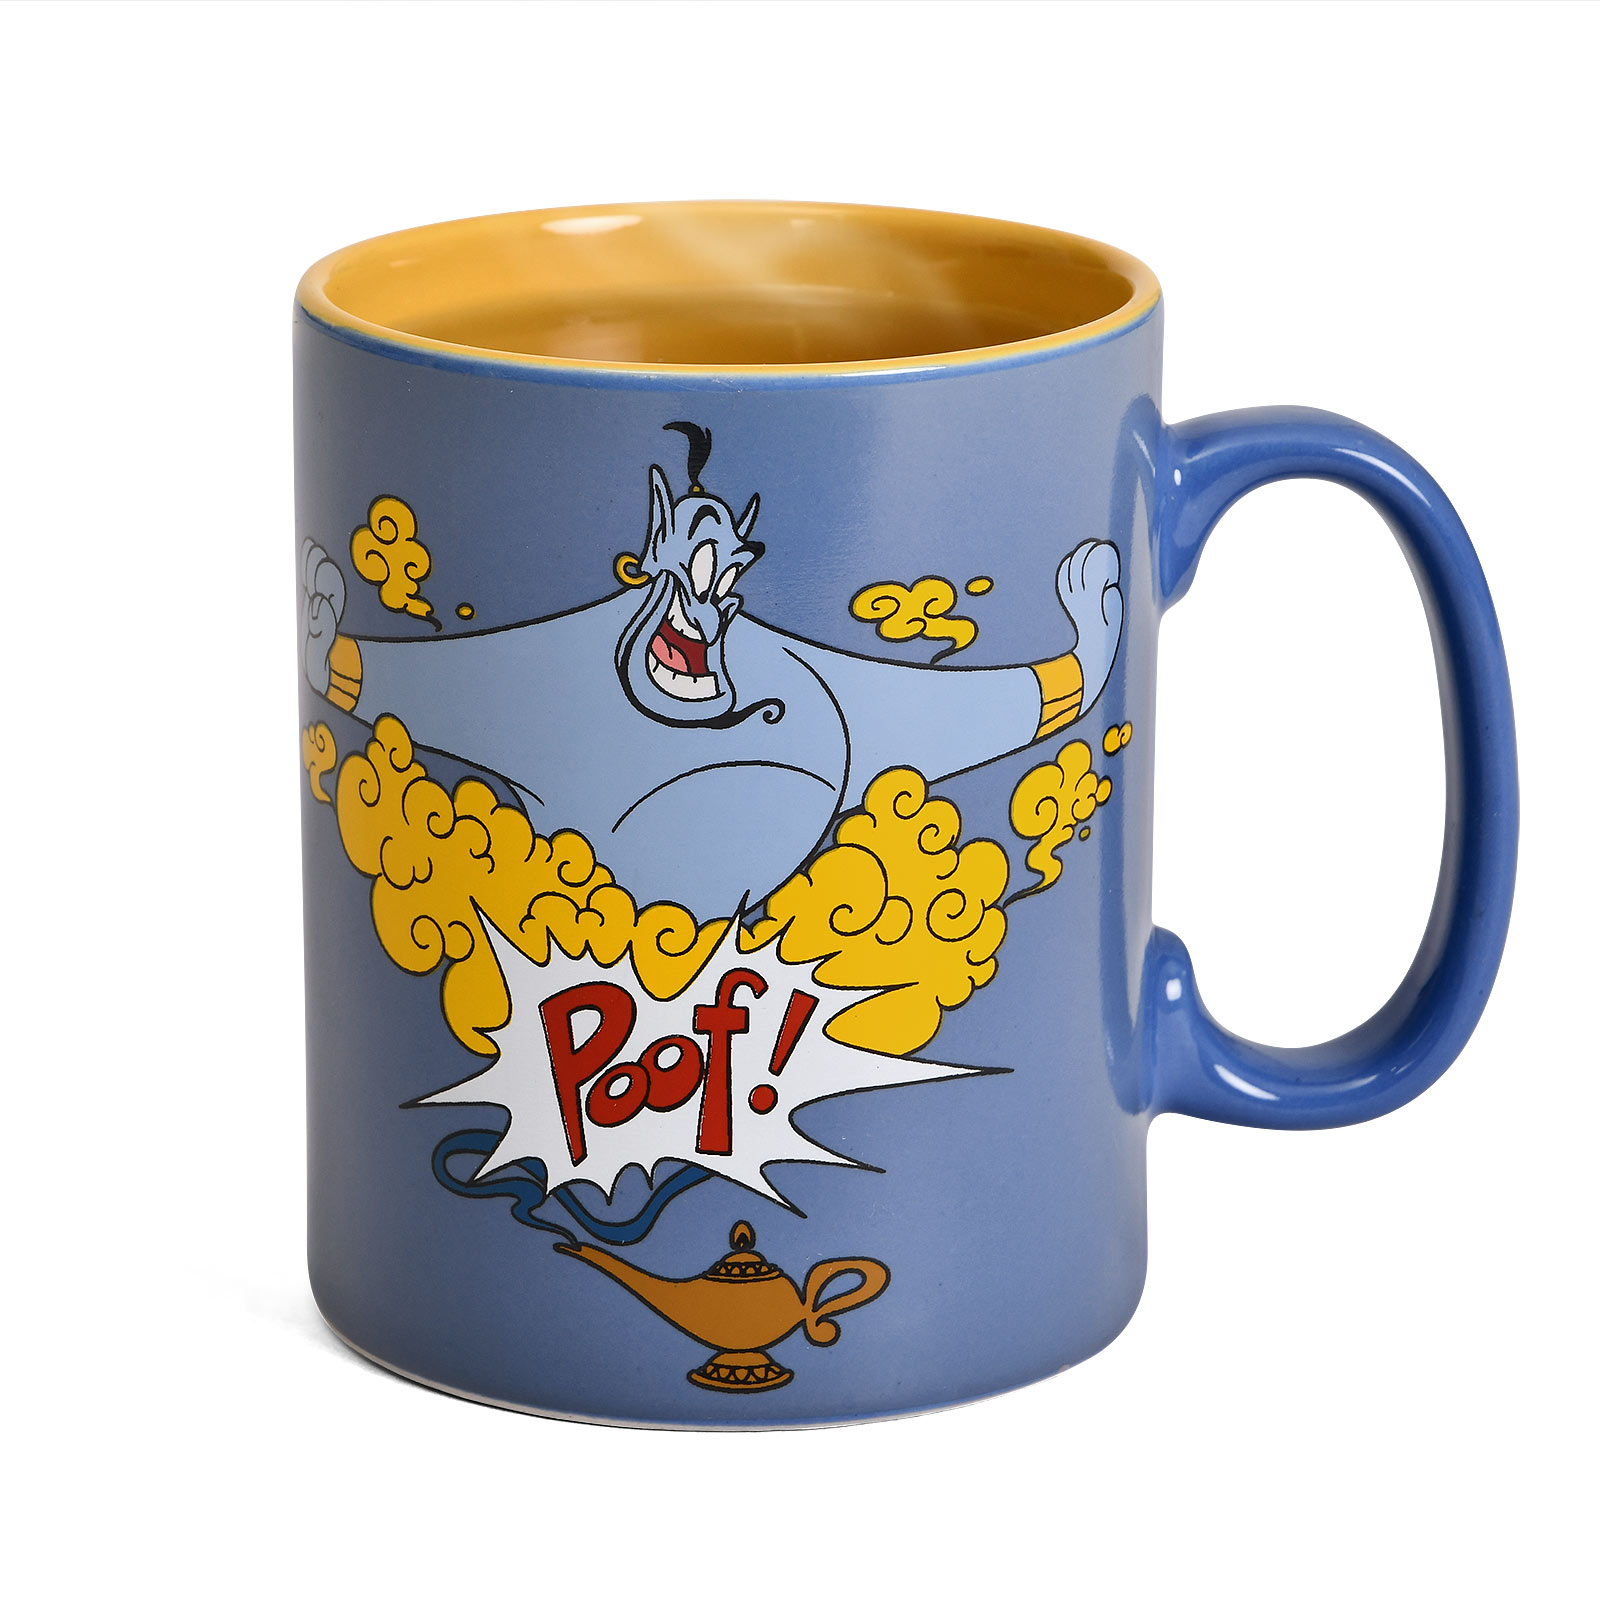 Aladdin - Genie Direct To You From The Lamp Thermal Effect Mug